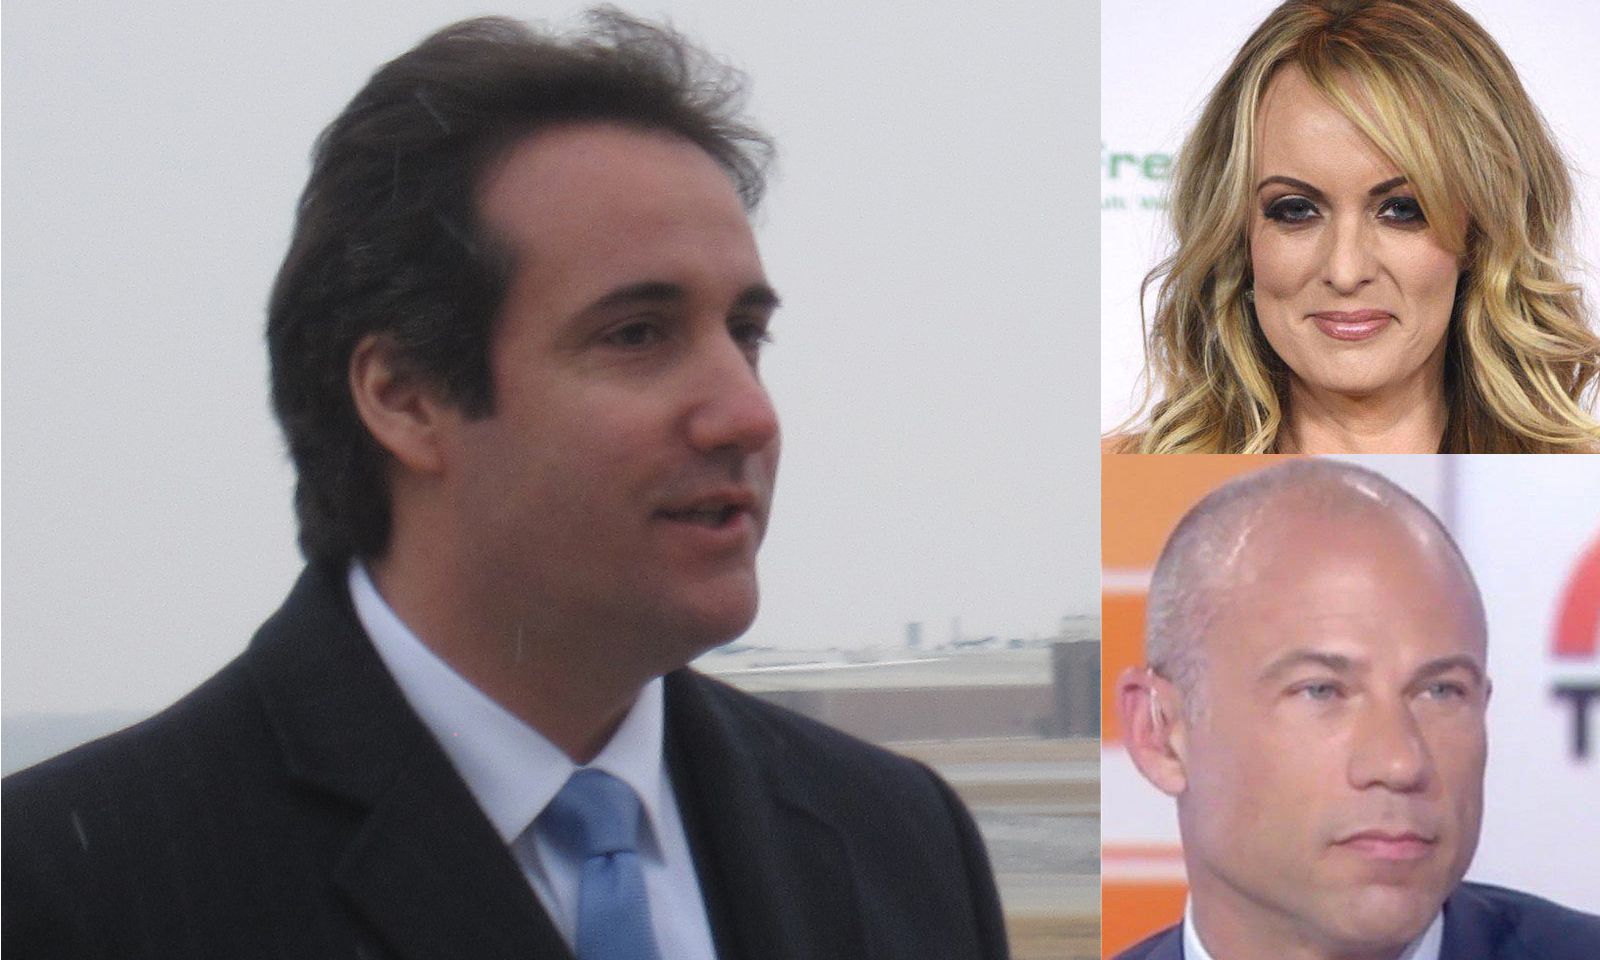 New Stormy Daniels Court Filing: Trump’s Lawyer Defamed Me